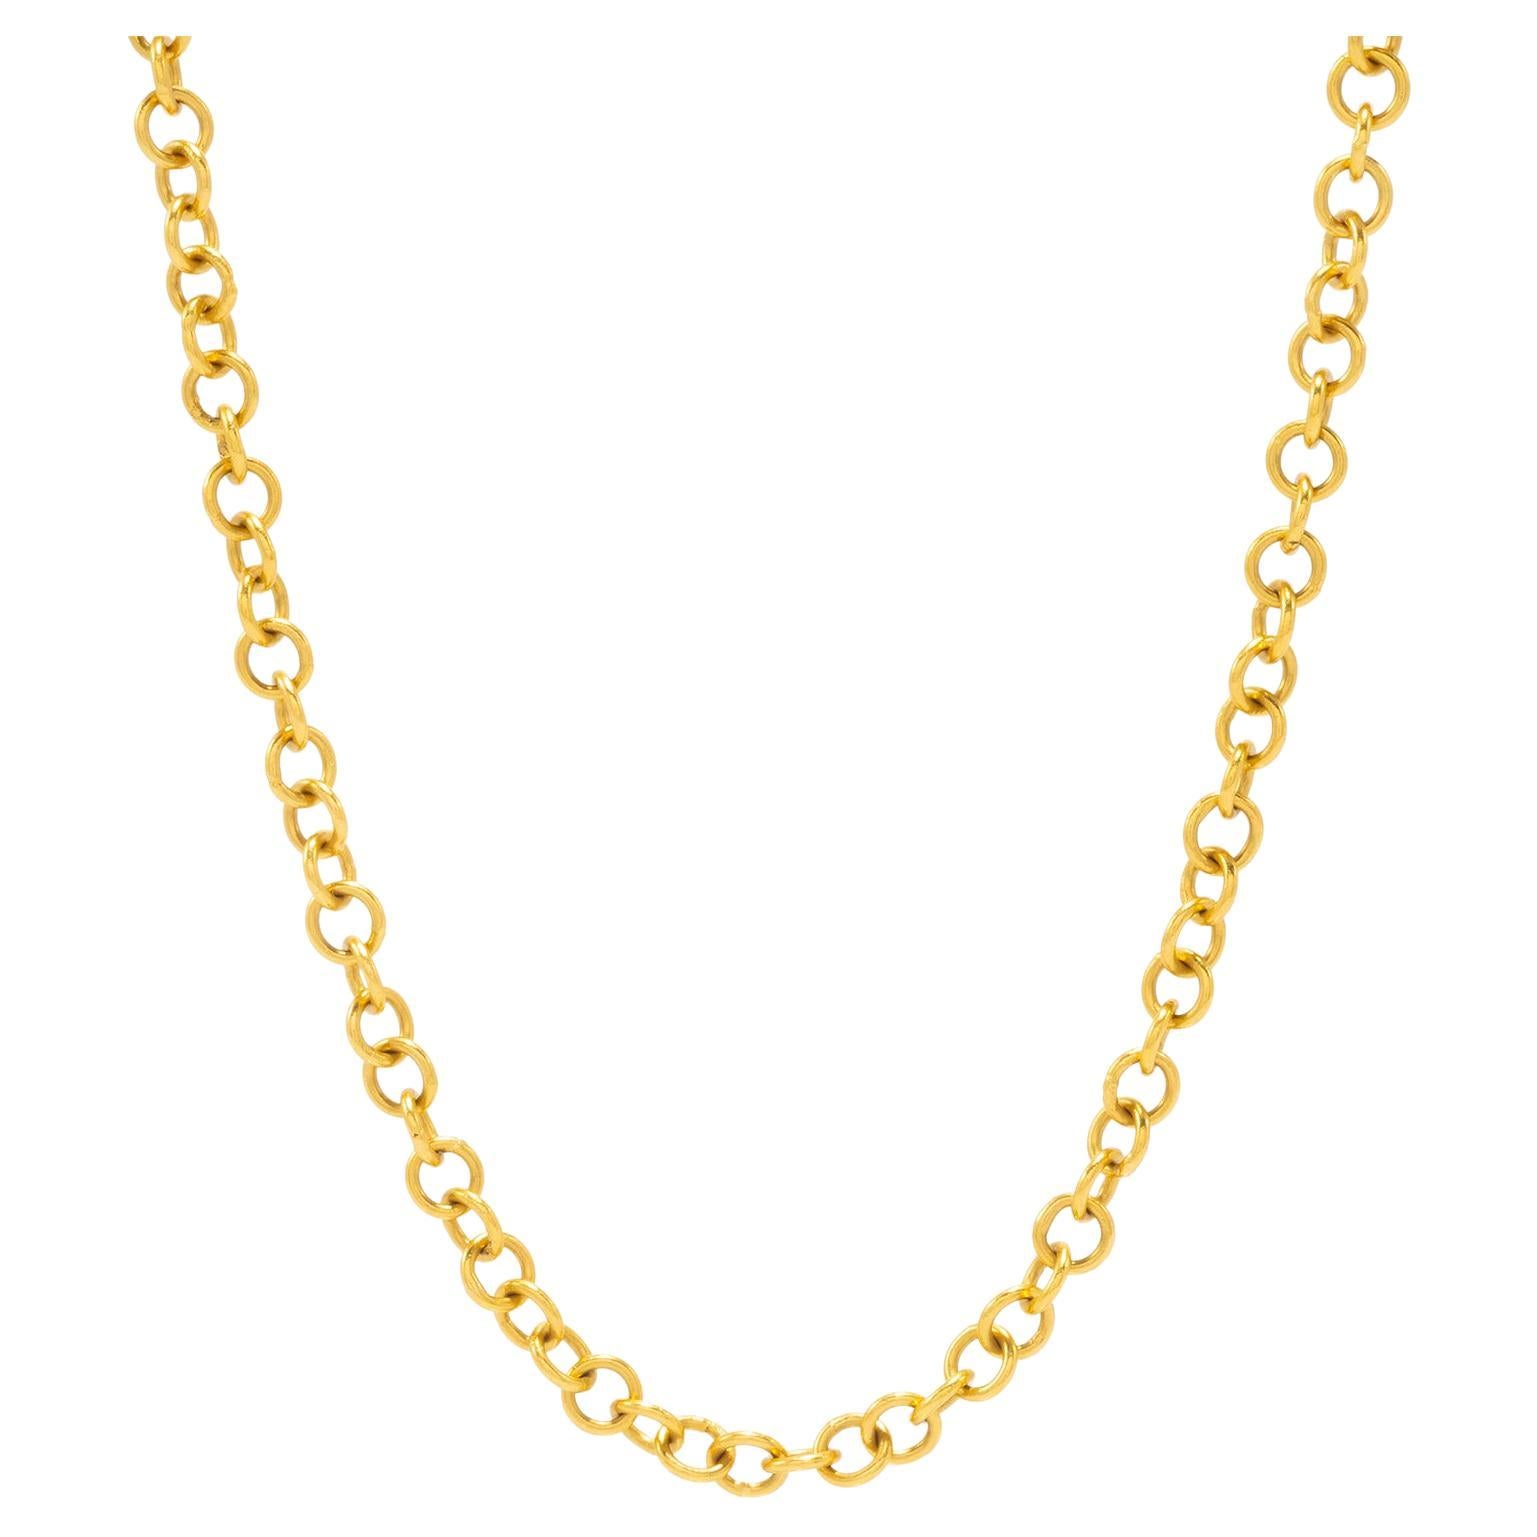 16" 20k Gold Handmade Thick Chain Necklace